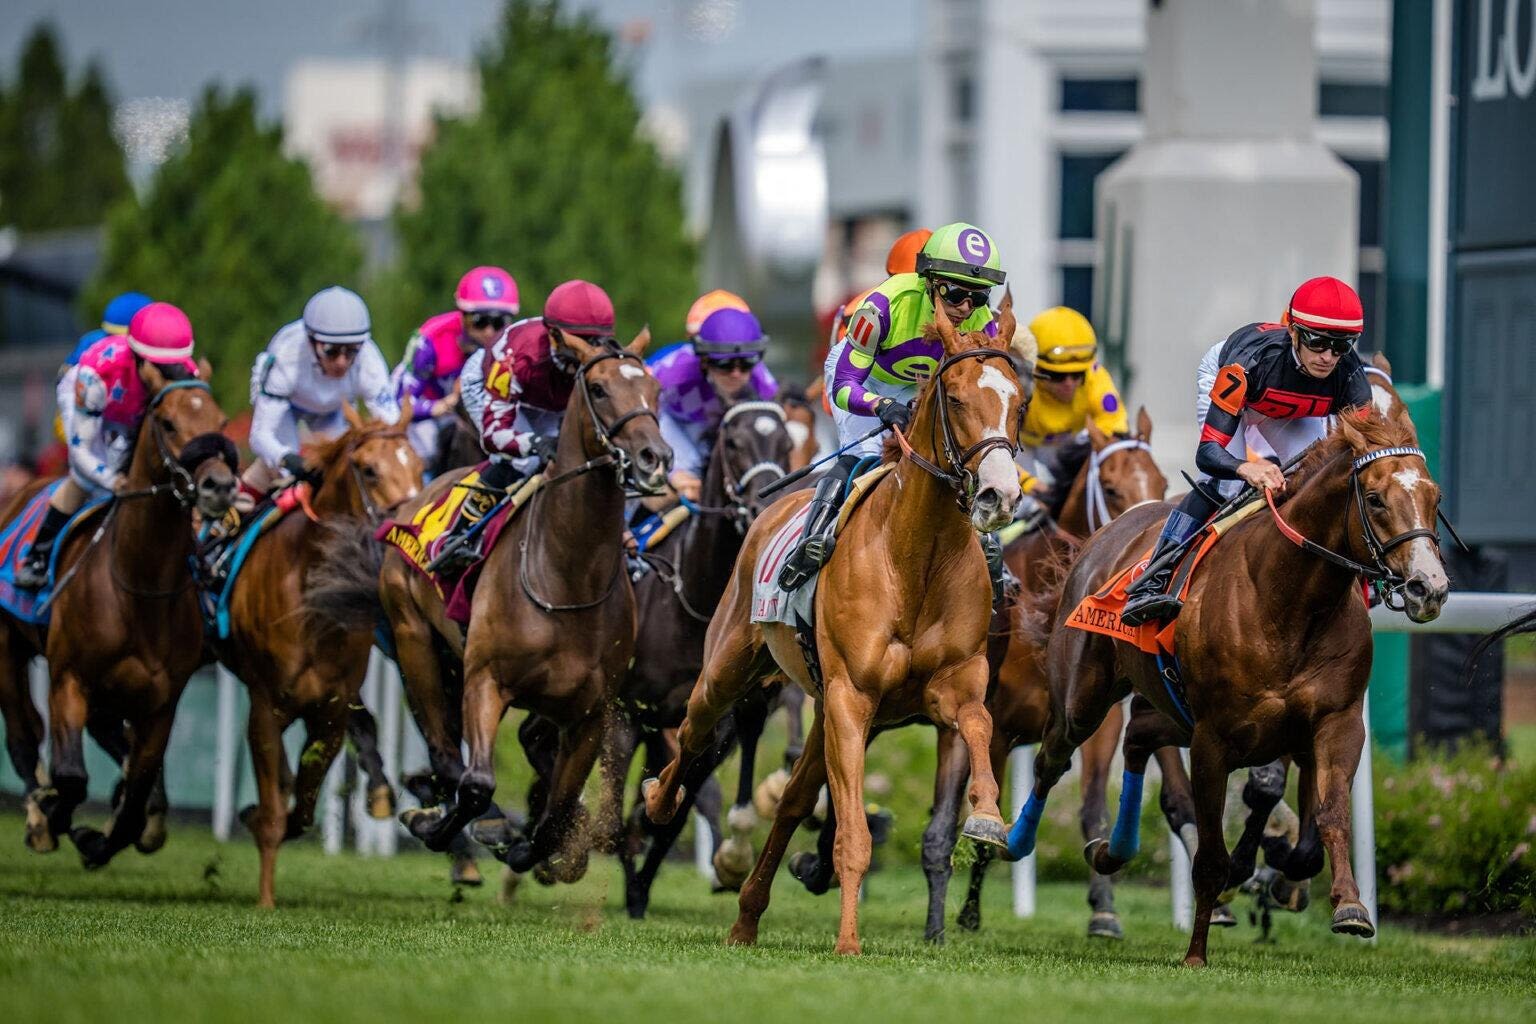 How to Watch the Kentucky Derby This Weekend